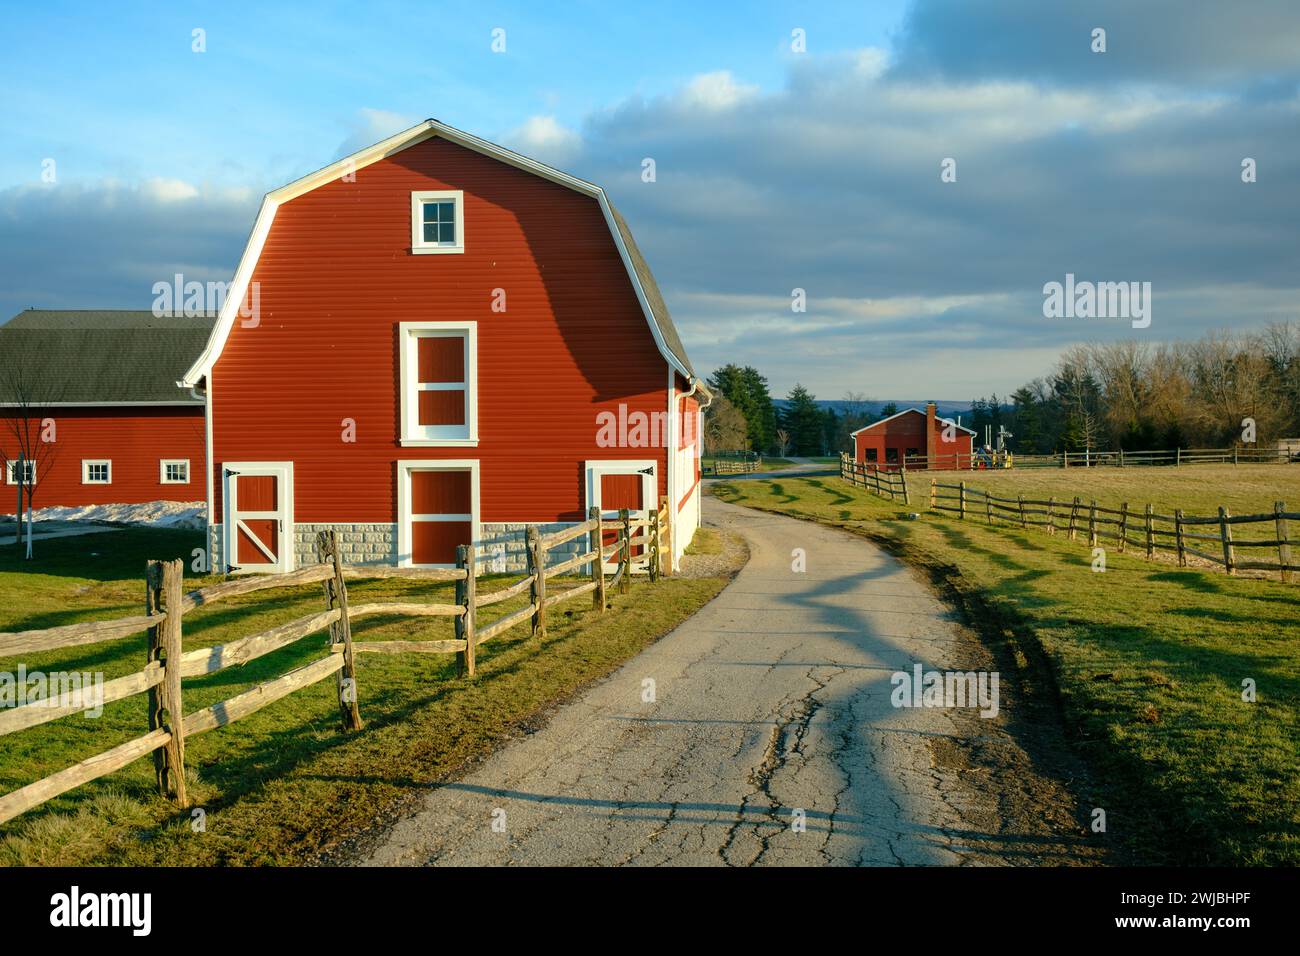 Rural scene with barns at Knox Farm State Park, East Aurora, New York Stock Photo